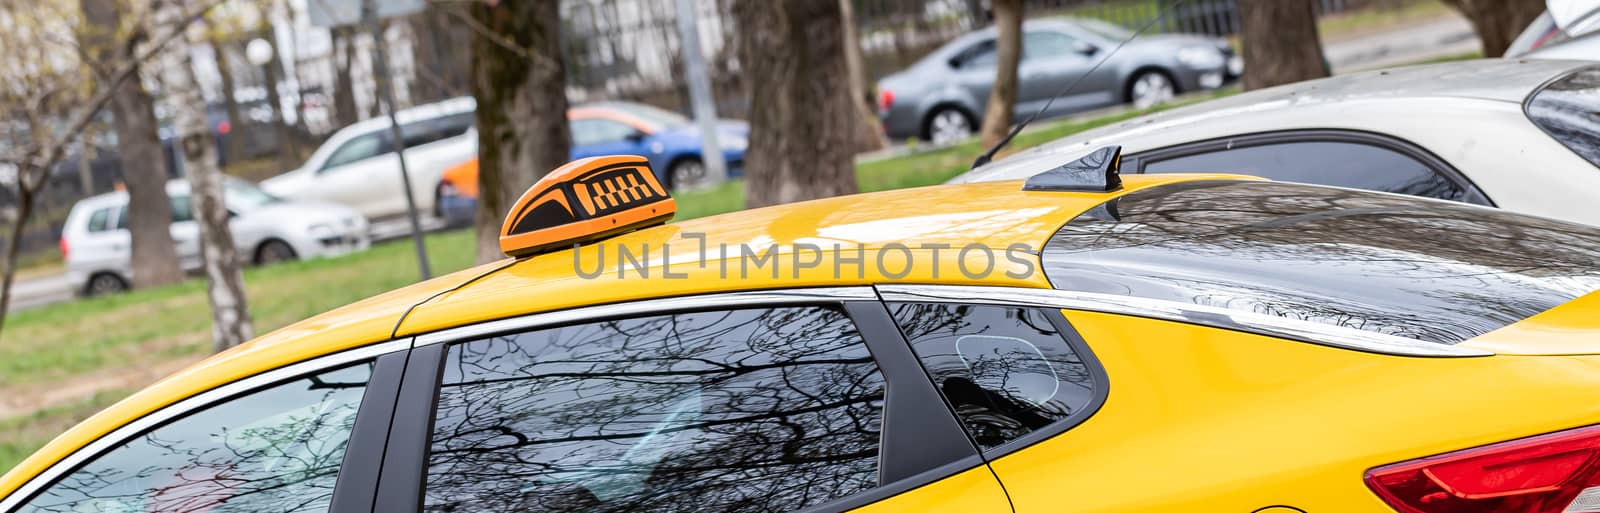 Taxi Cab Car Roof Sign Close Up by bonilook